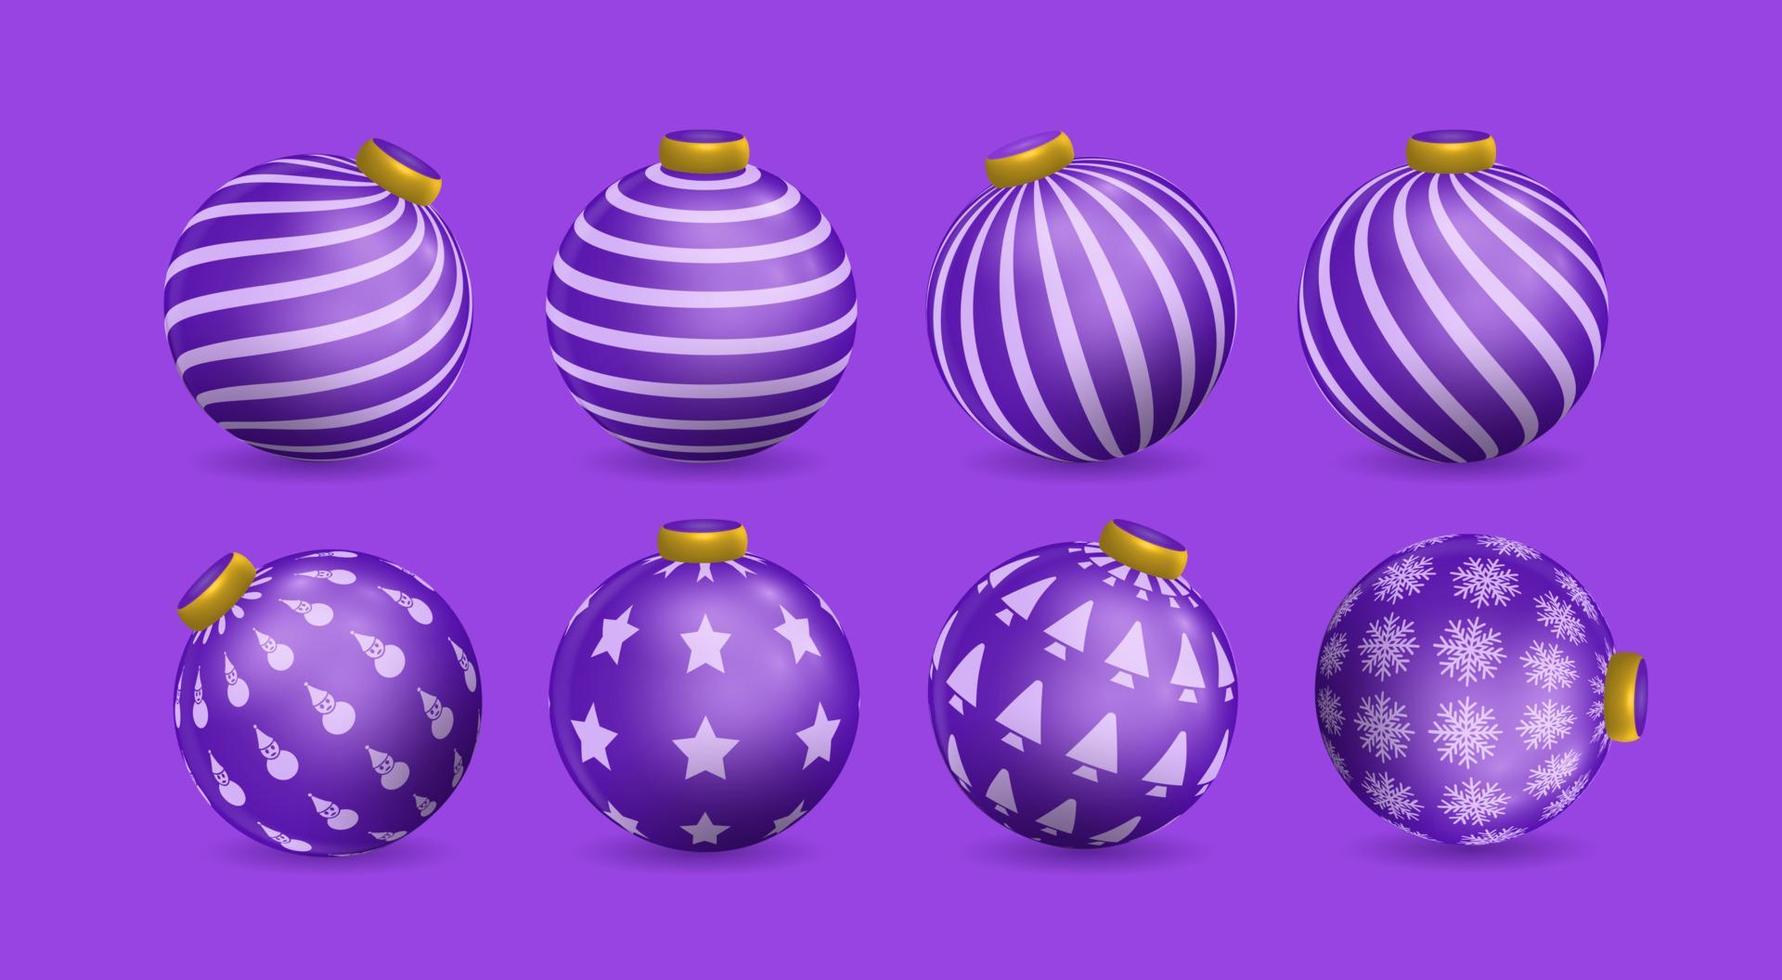 set of purple Christmas ball decorations, with various patterns, vector